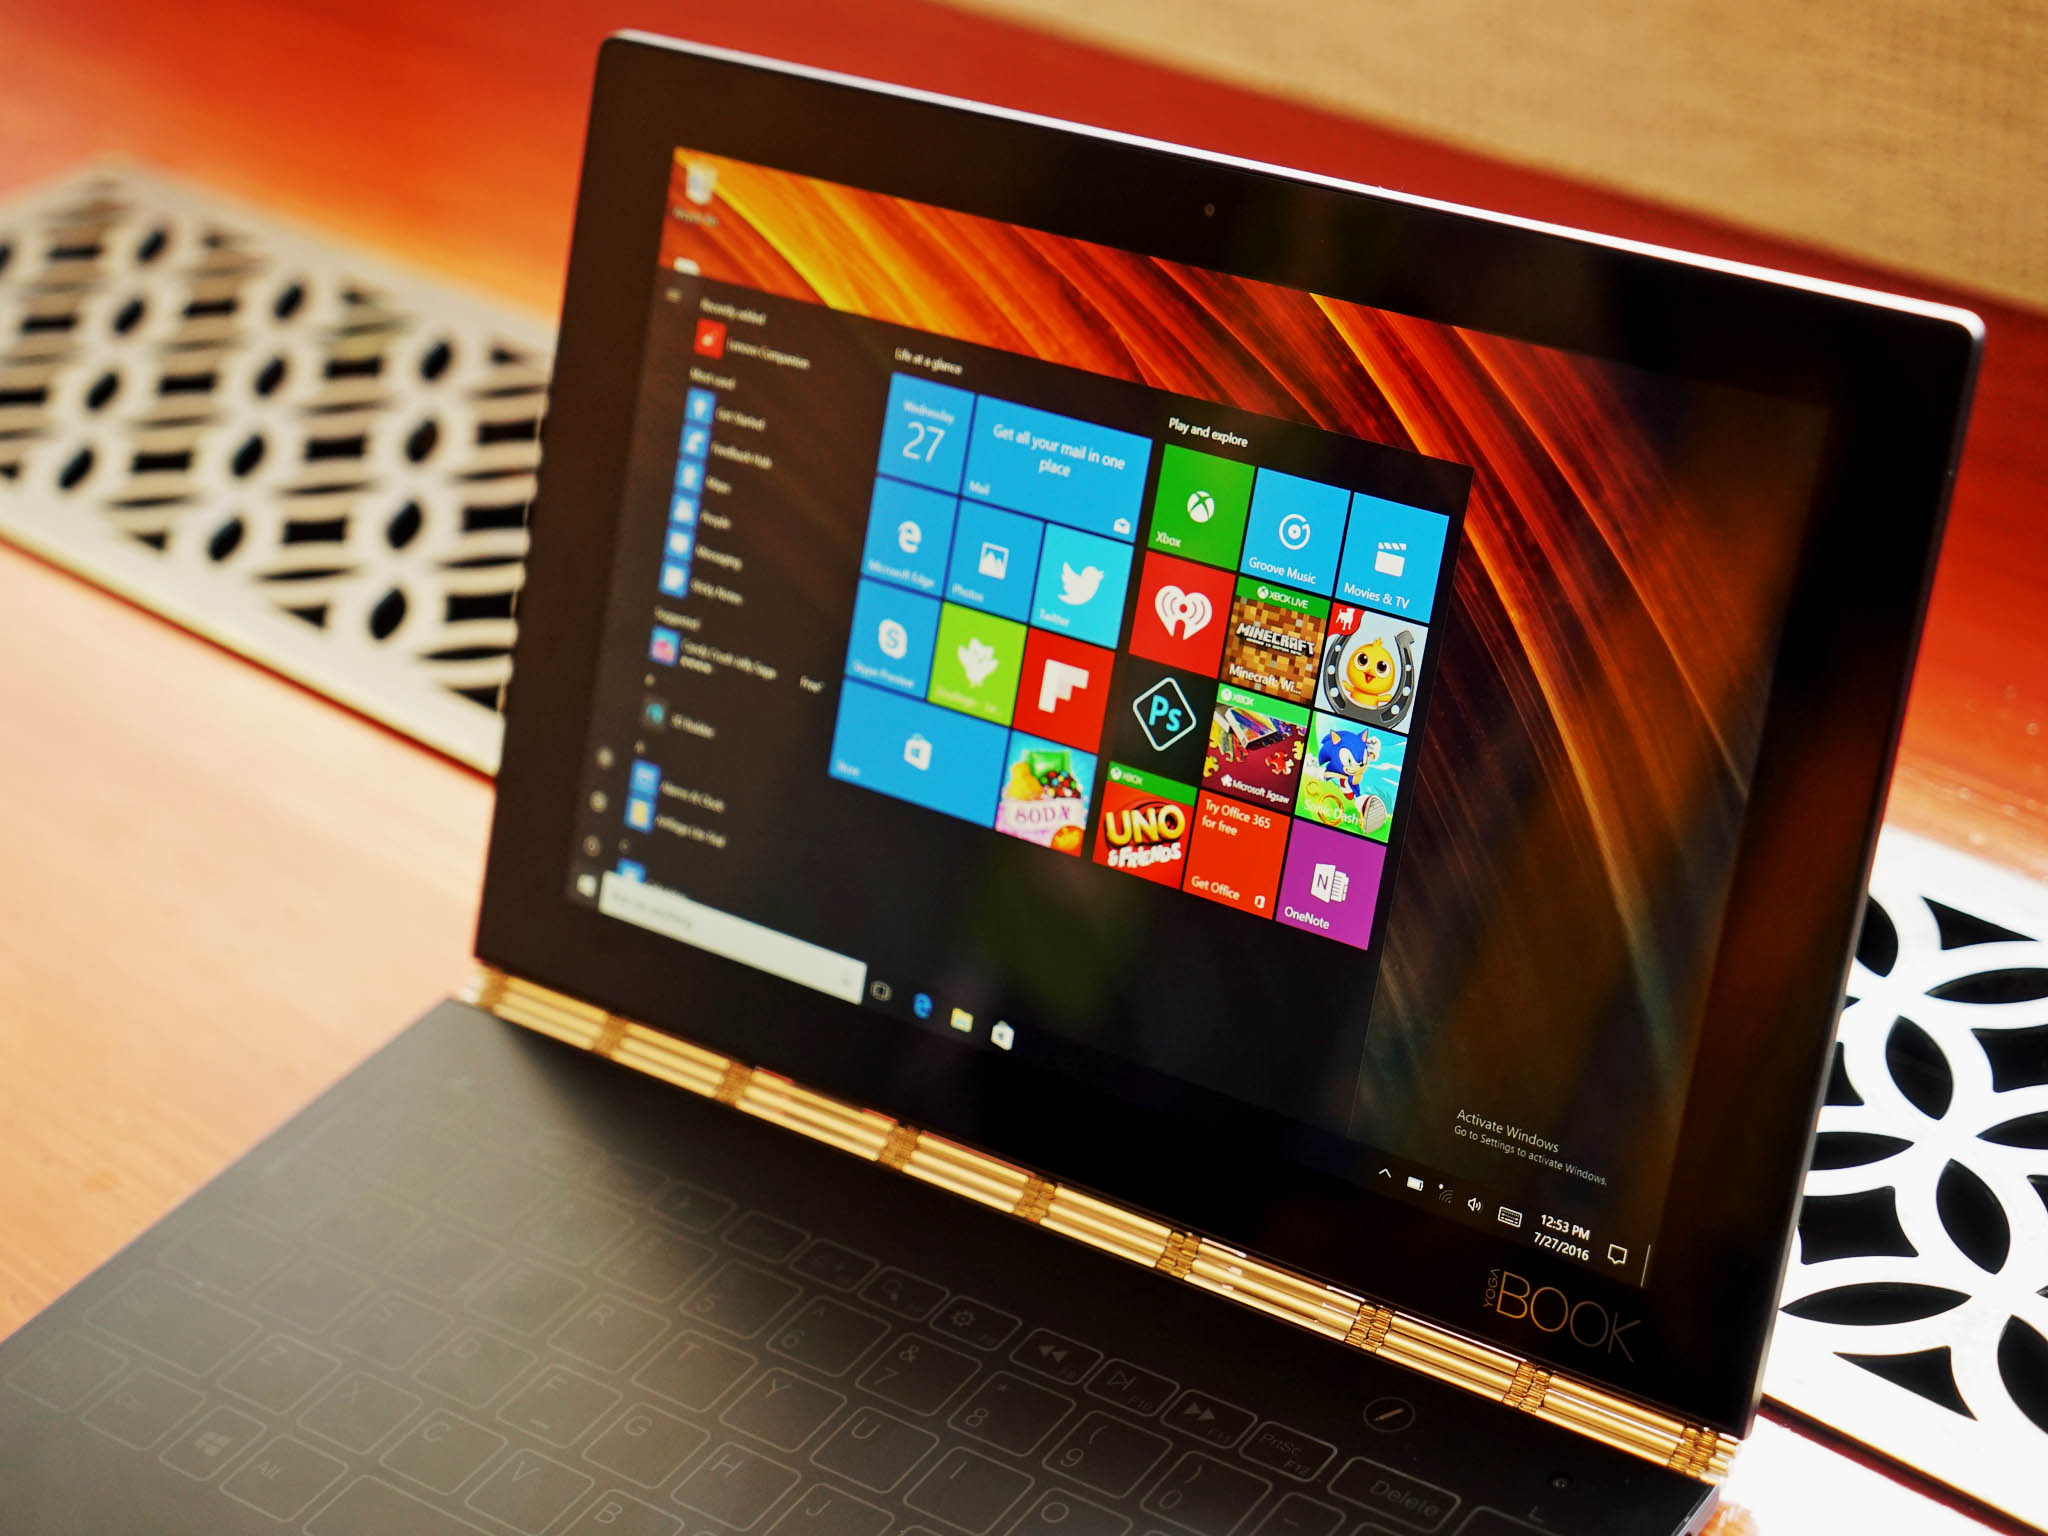 Unboxing and hands on with the Lenovo Yoga Book with Windows 10